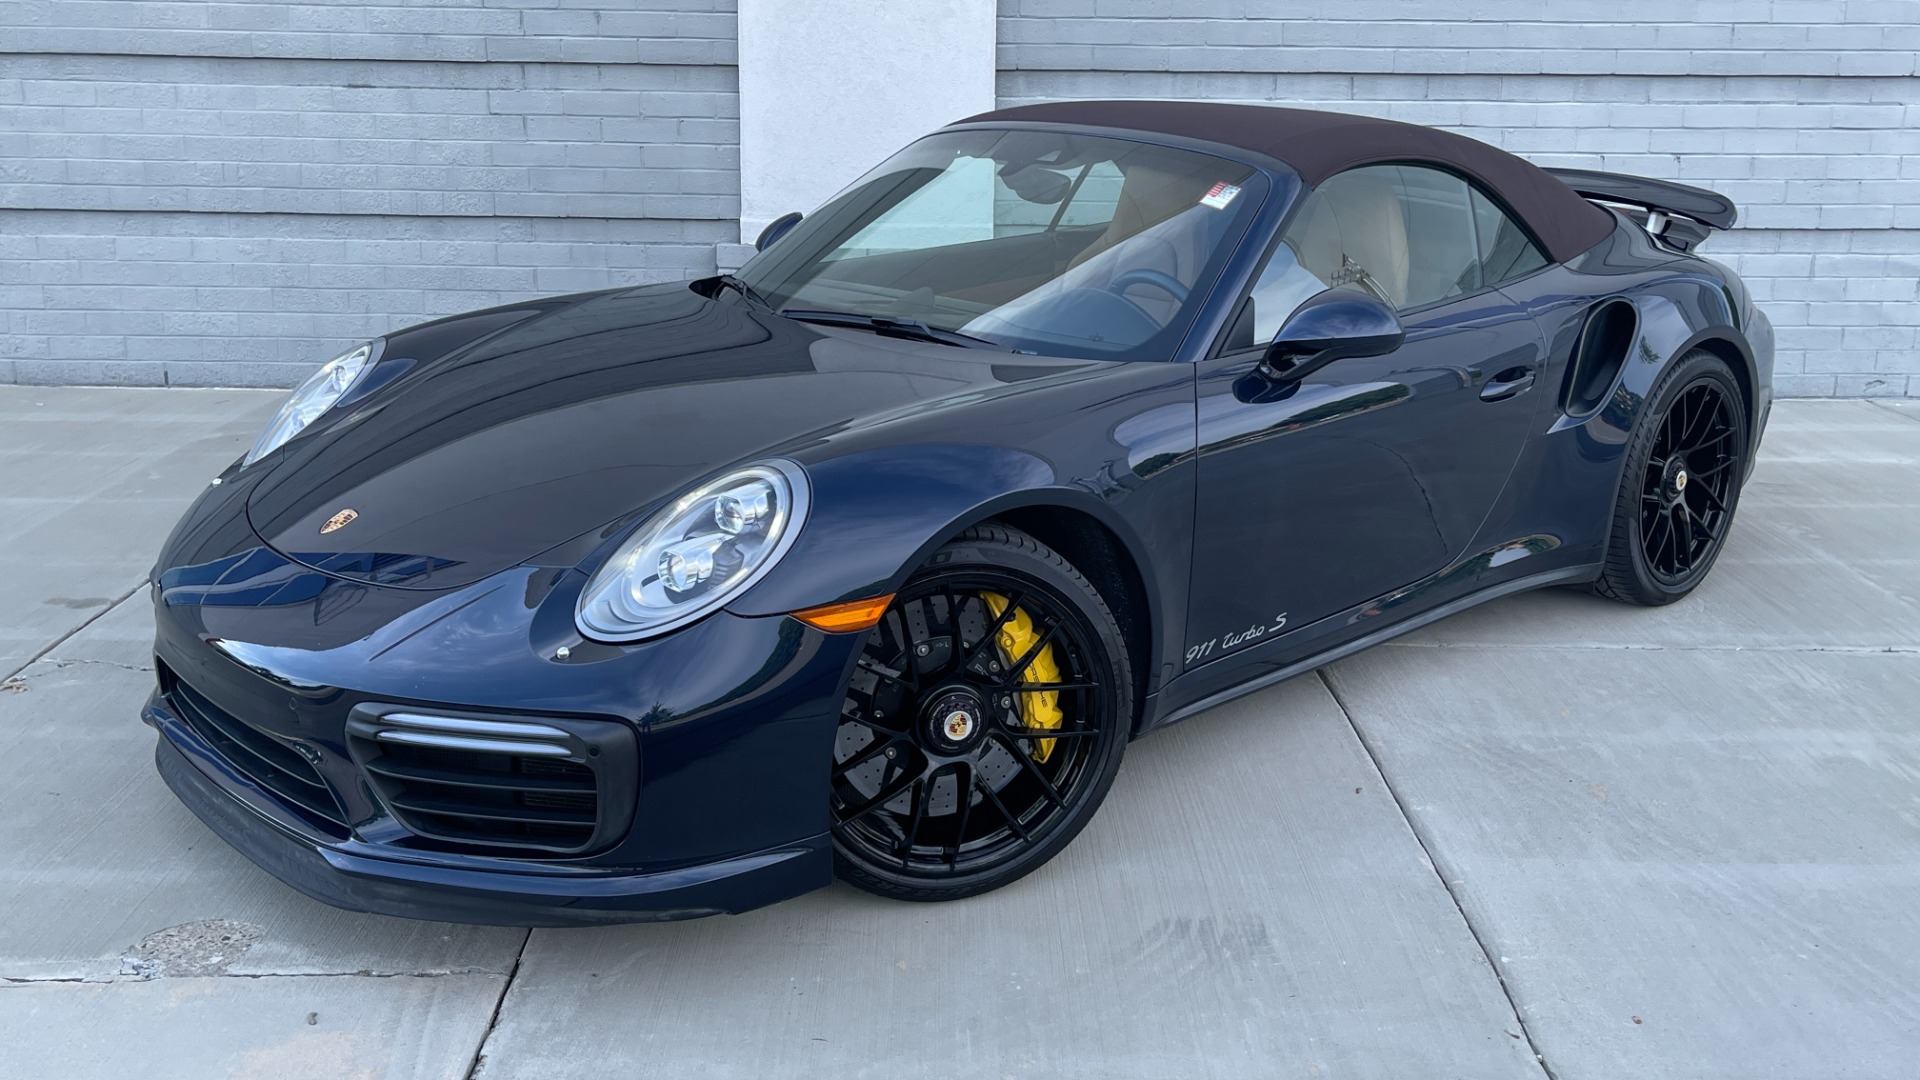 Used 2017 Porsche 911 Turbo S / CABRIOLET / FRONT LIFT / PDK / 20IN WHEELS for sale Sold at Formula Imports in Charlotte NC 28227 3